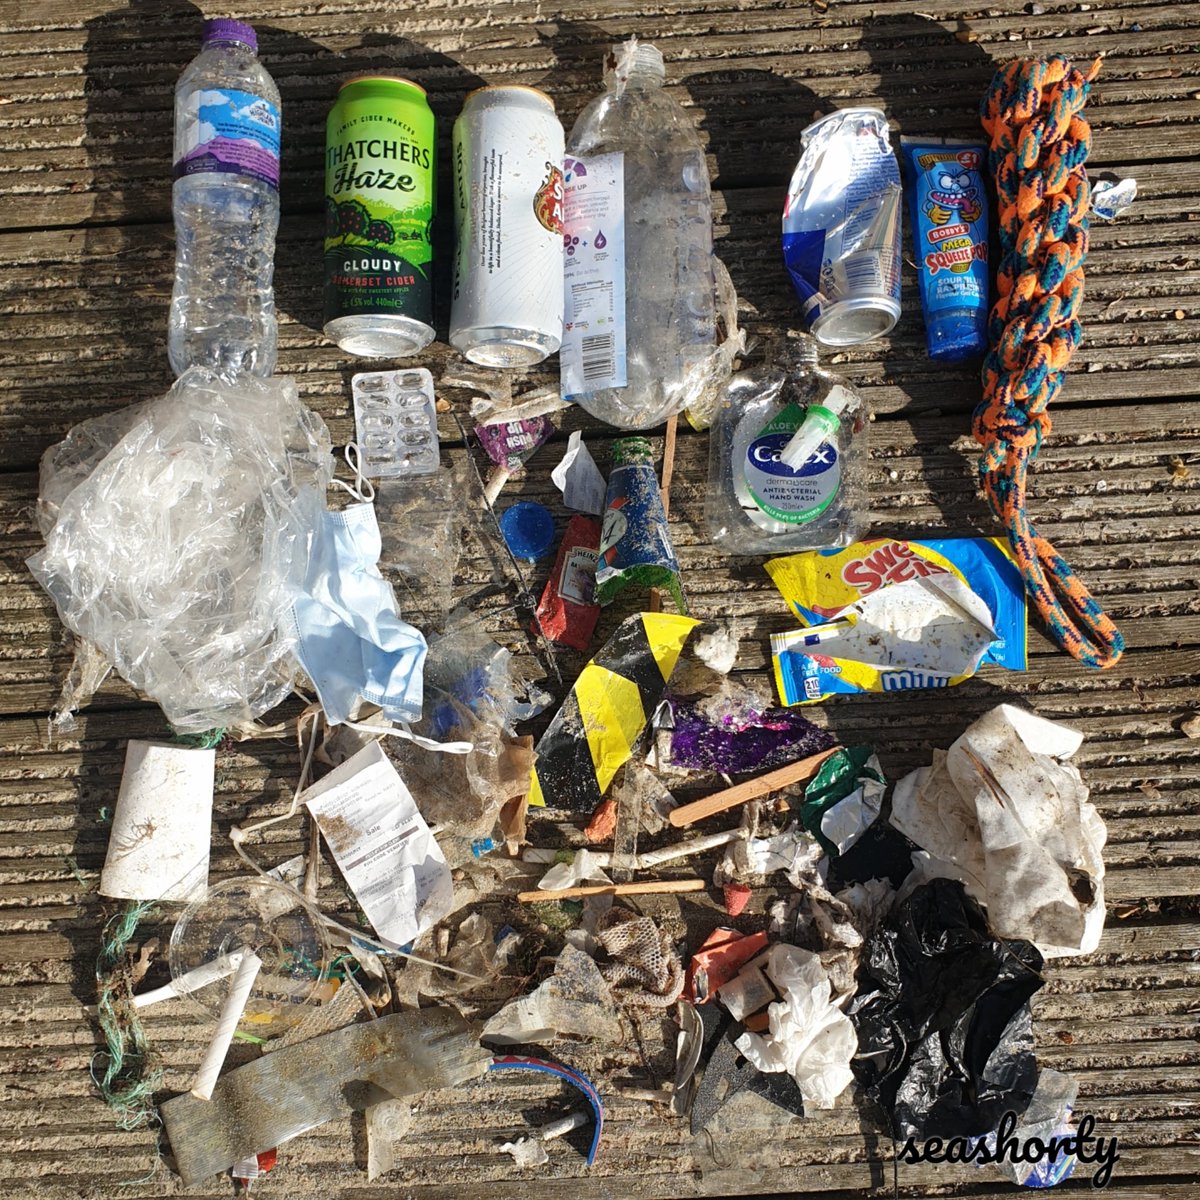 120 pieces today. Not looking too bad out there at the moment. Collecting stuff washed up in the seaweed but having to look hard to find anything else! #marinelitter #saynotosingleus #plasticpollution #2minutebeachclean #litterfreedorset #leaveonlyfootprints #Dorset